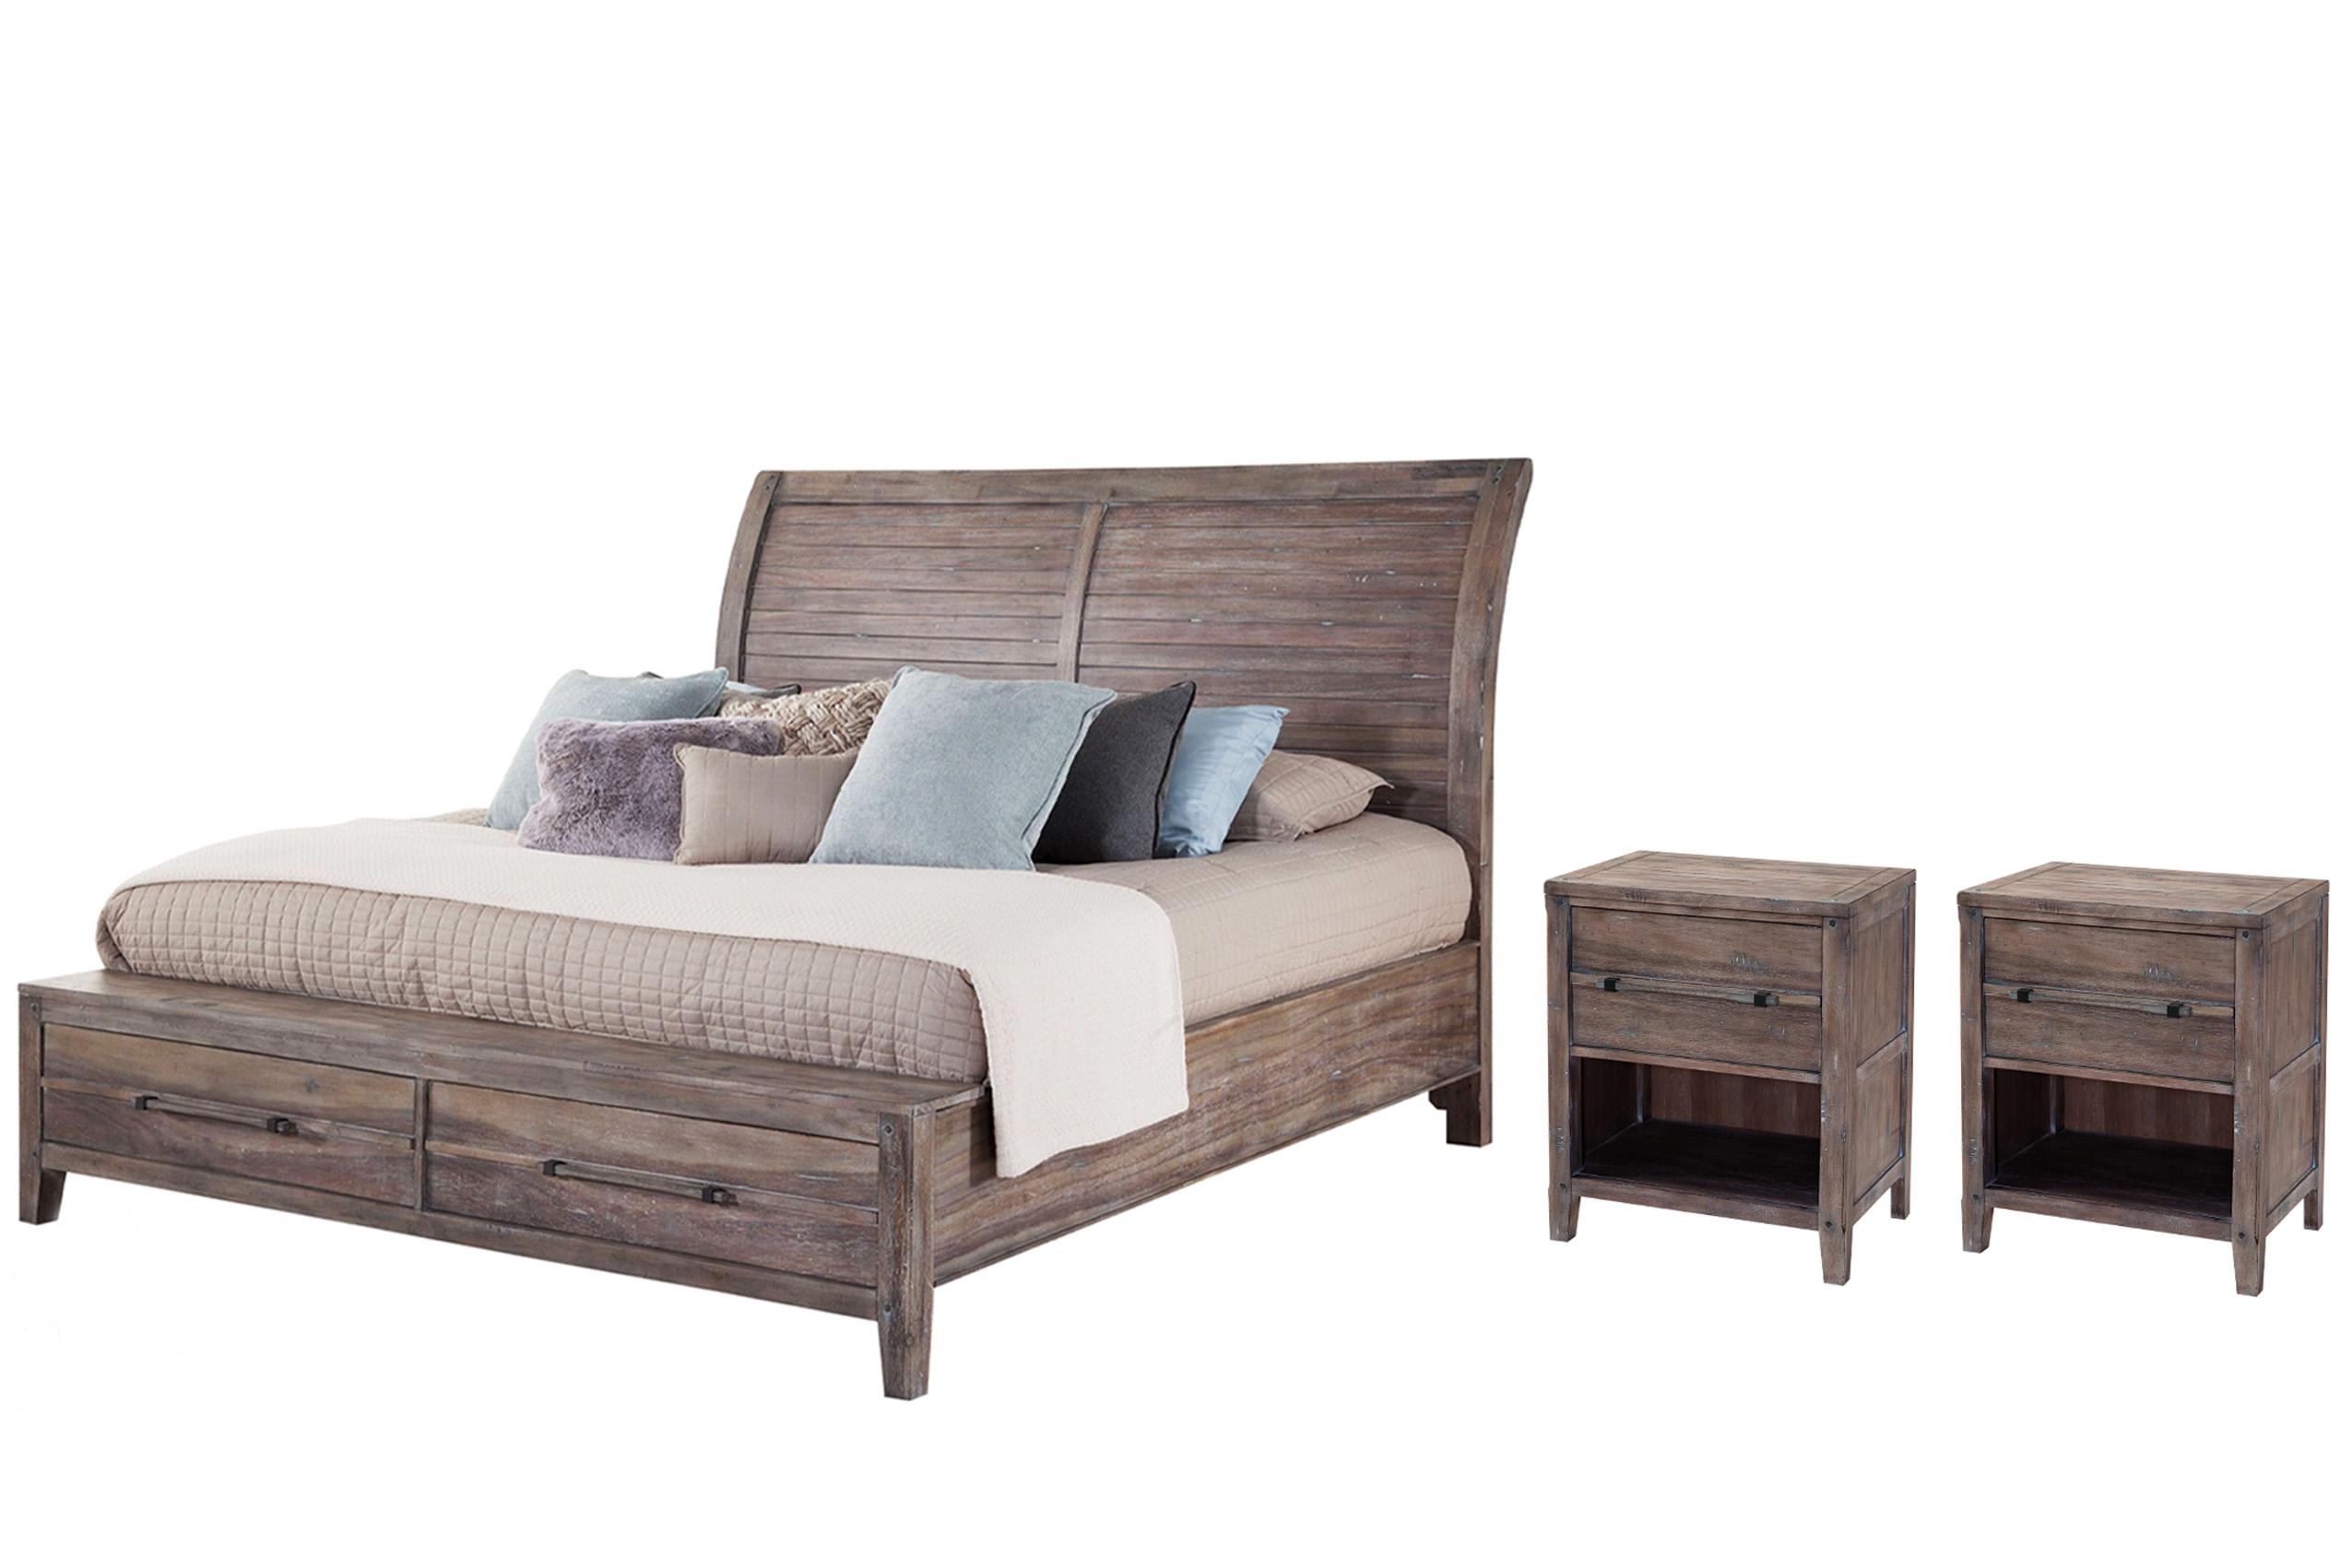 Classic, Traditional Sleigh Bedroom Set AURORA 2800-50SLES 2800-50SLES-2N-3PC in Driftwood, Gray 